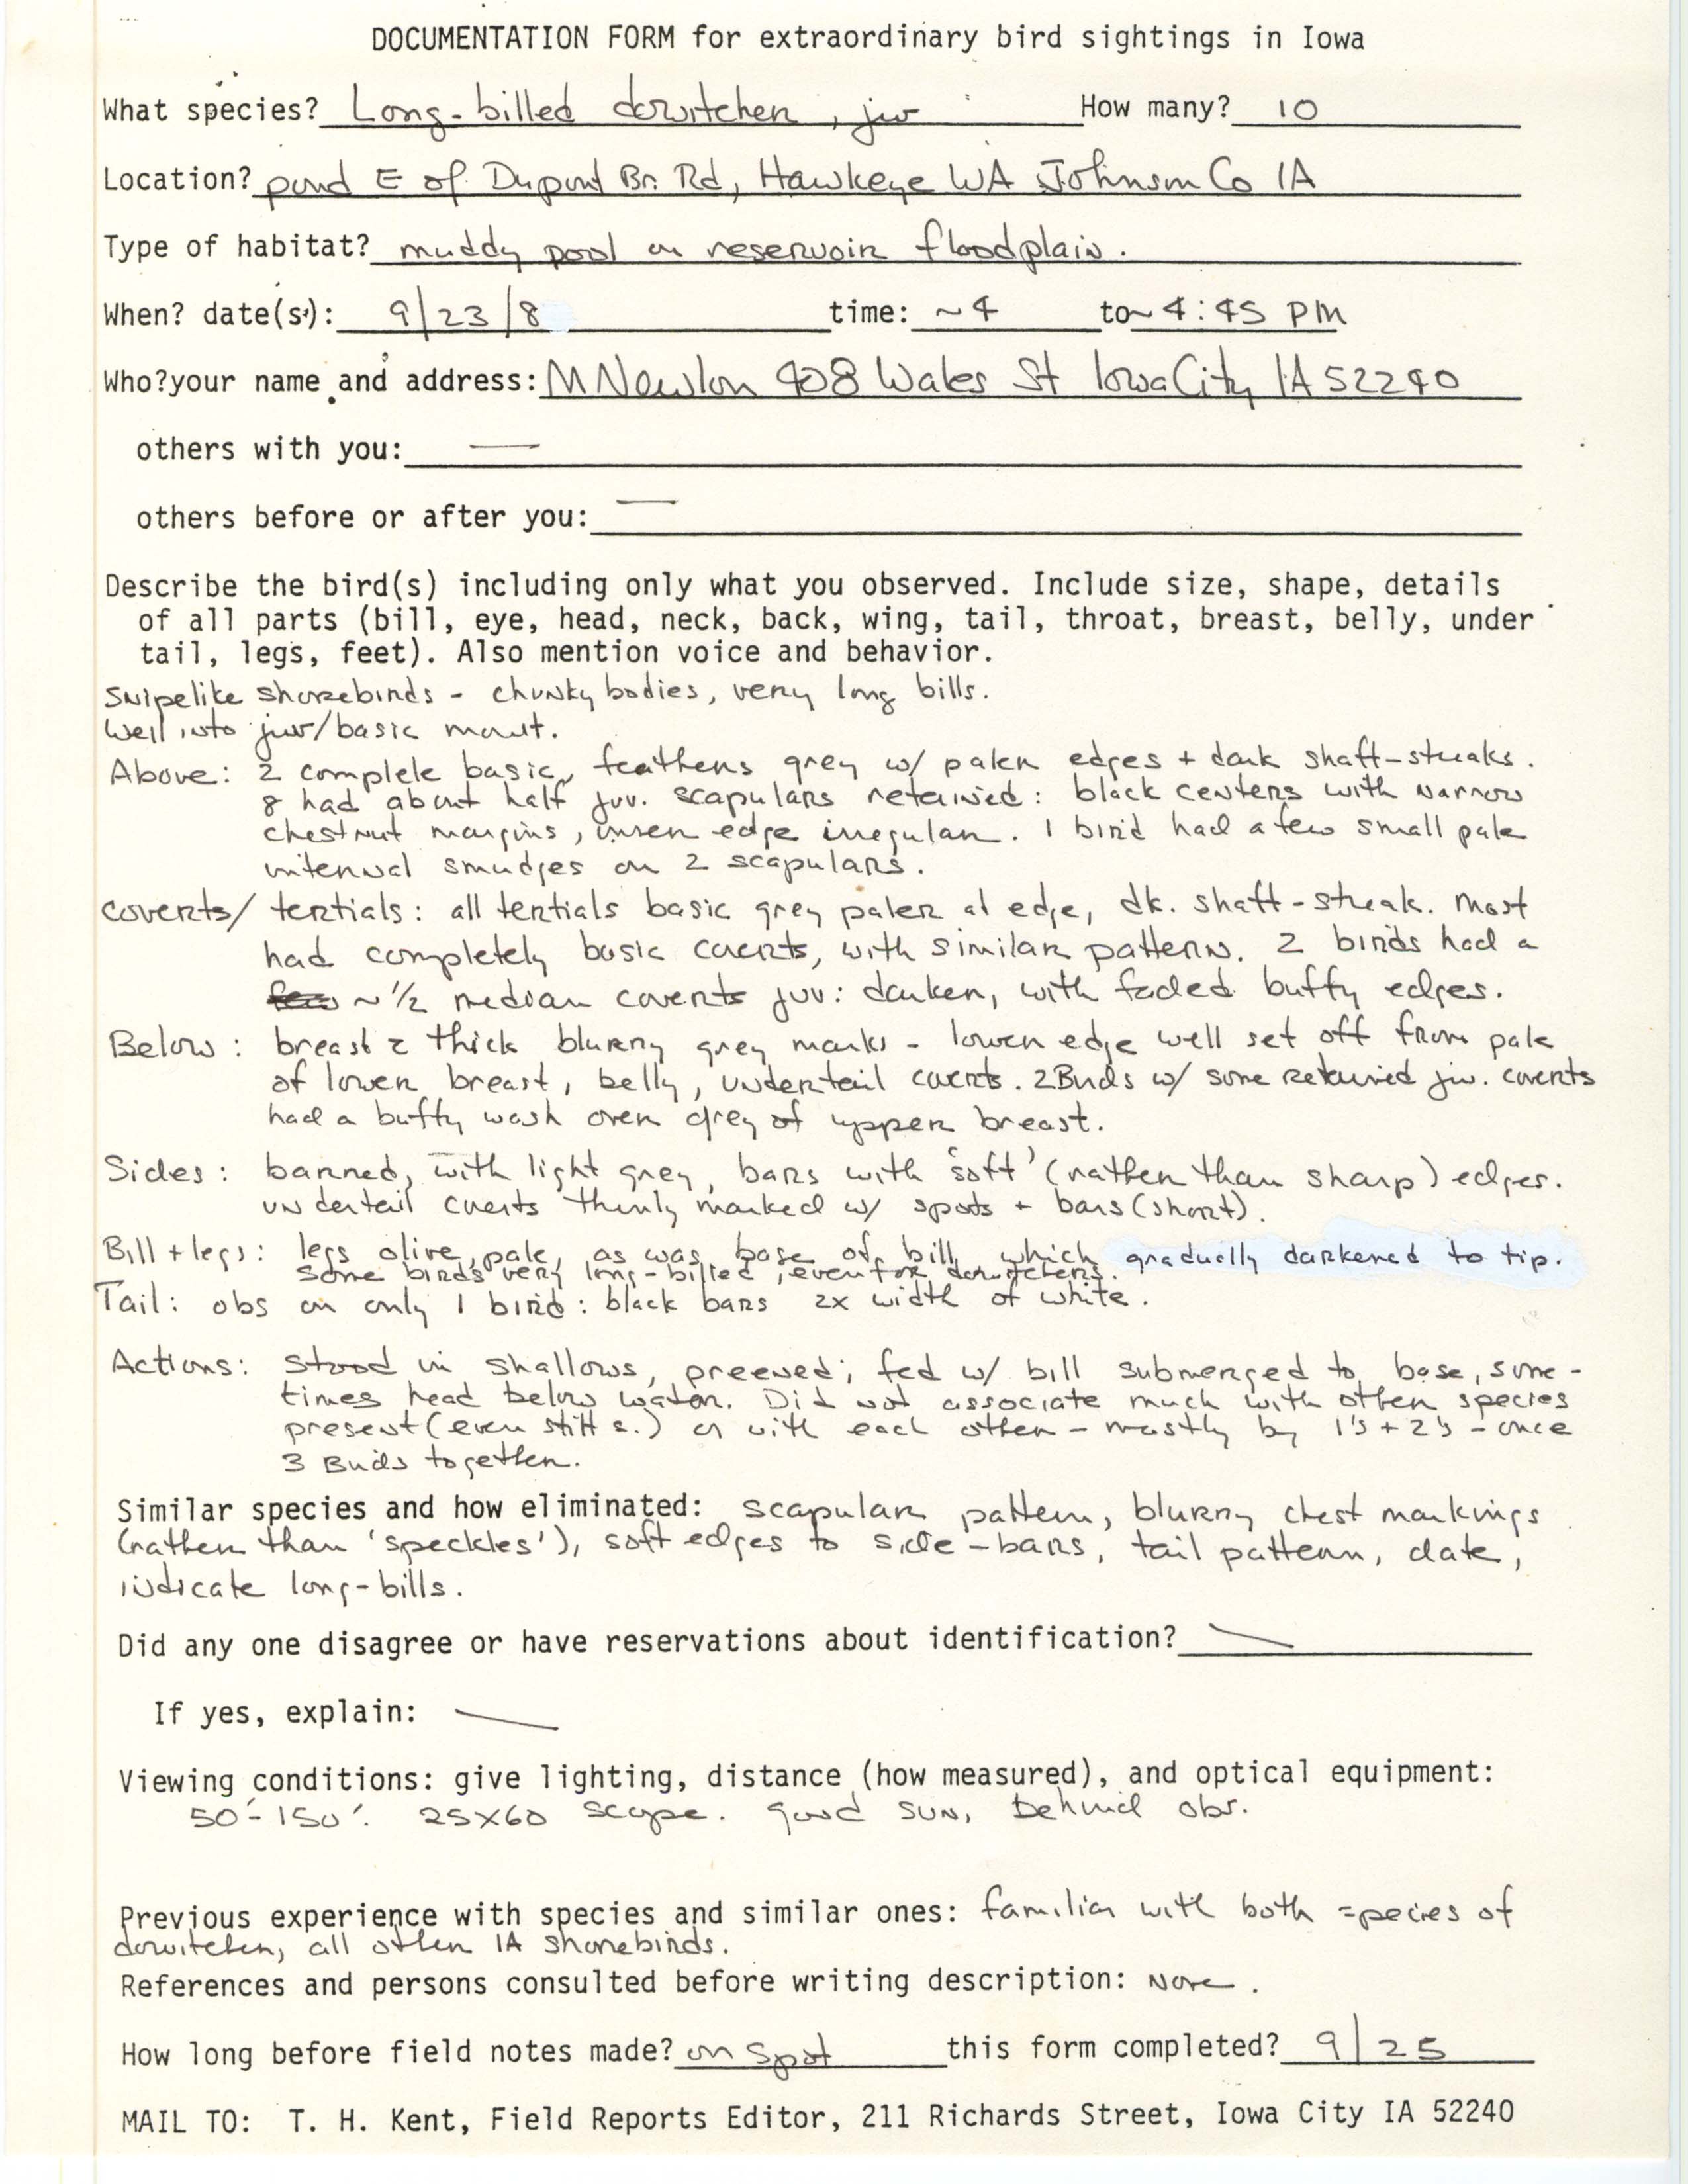 Rare bird documentation form for Long-billed Dowitcher at Hawkeye Wildlife Area, 1984